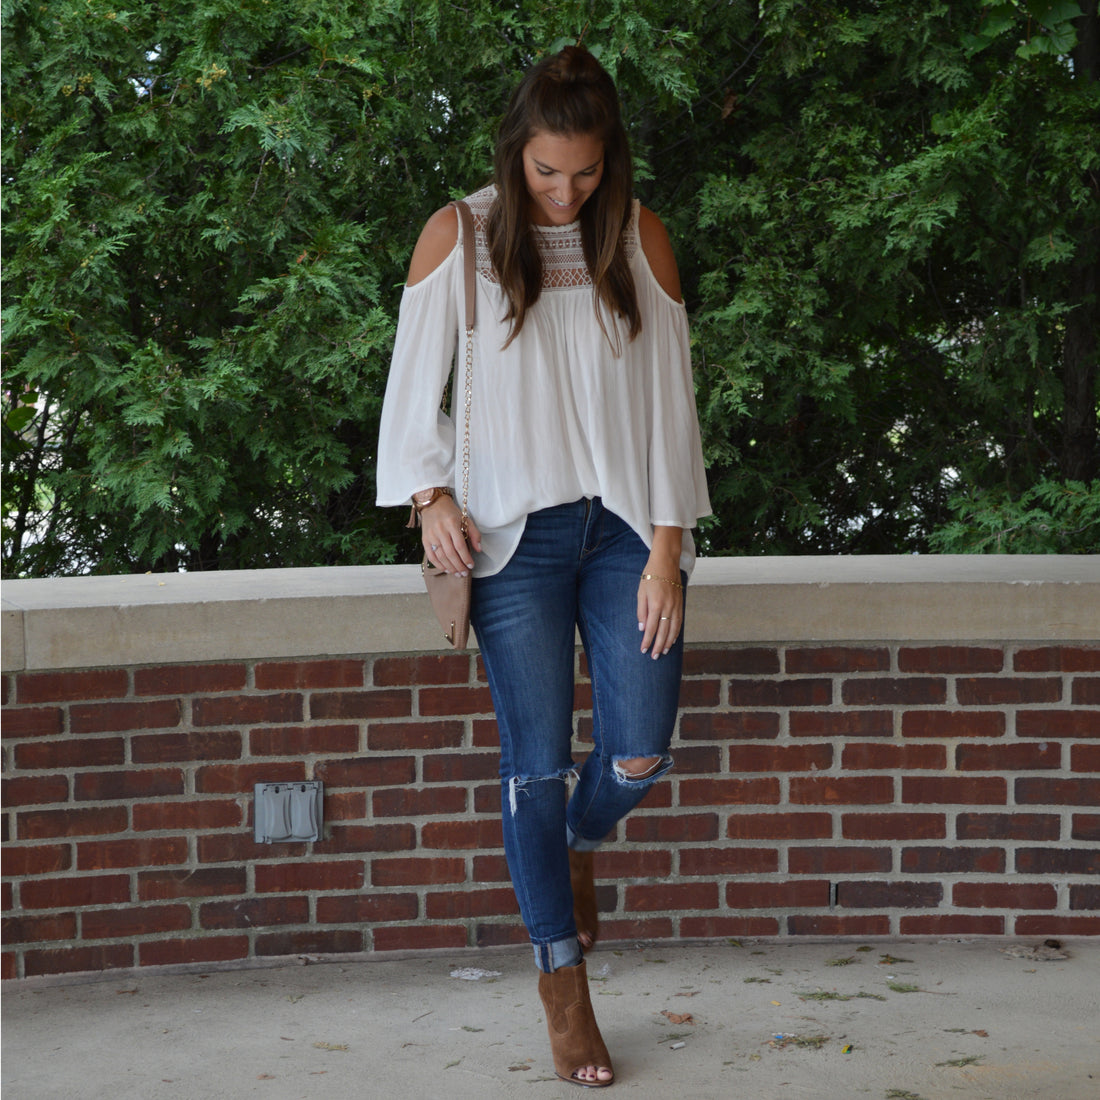 Neutral Fall Outfit with Peep Toe Booties